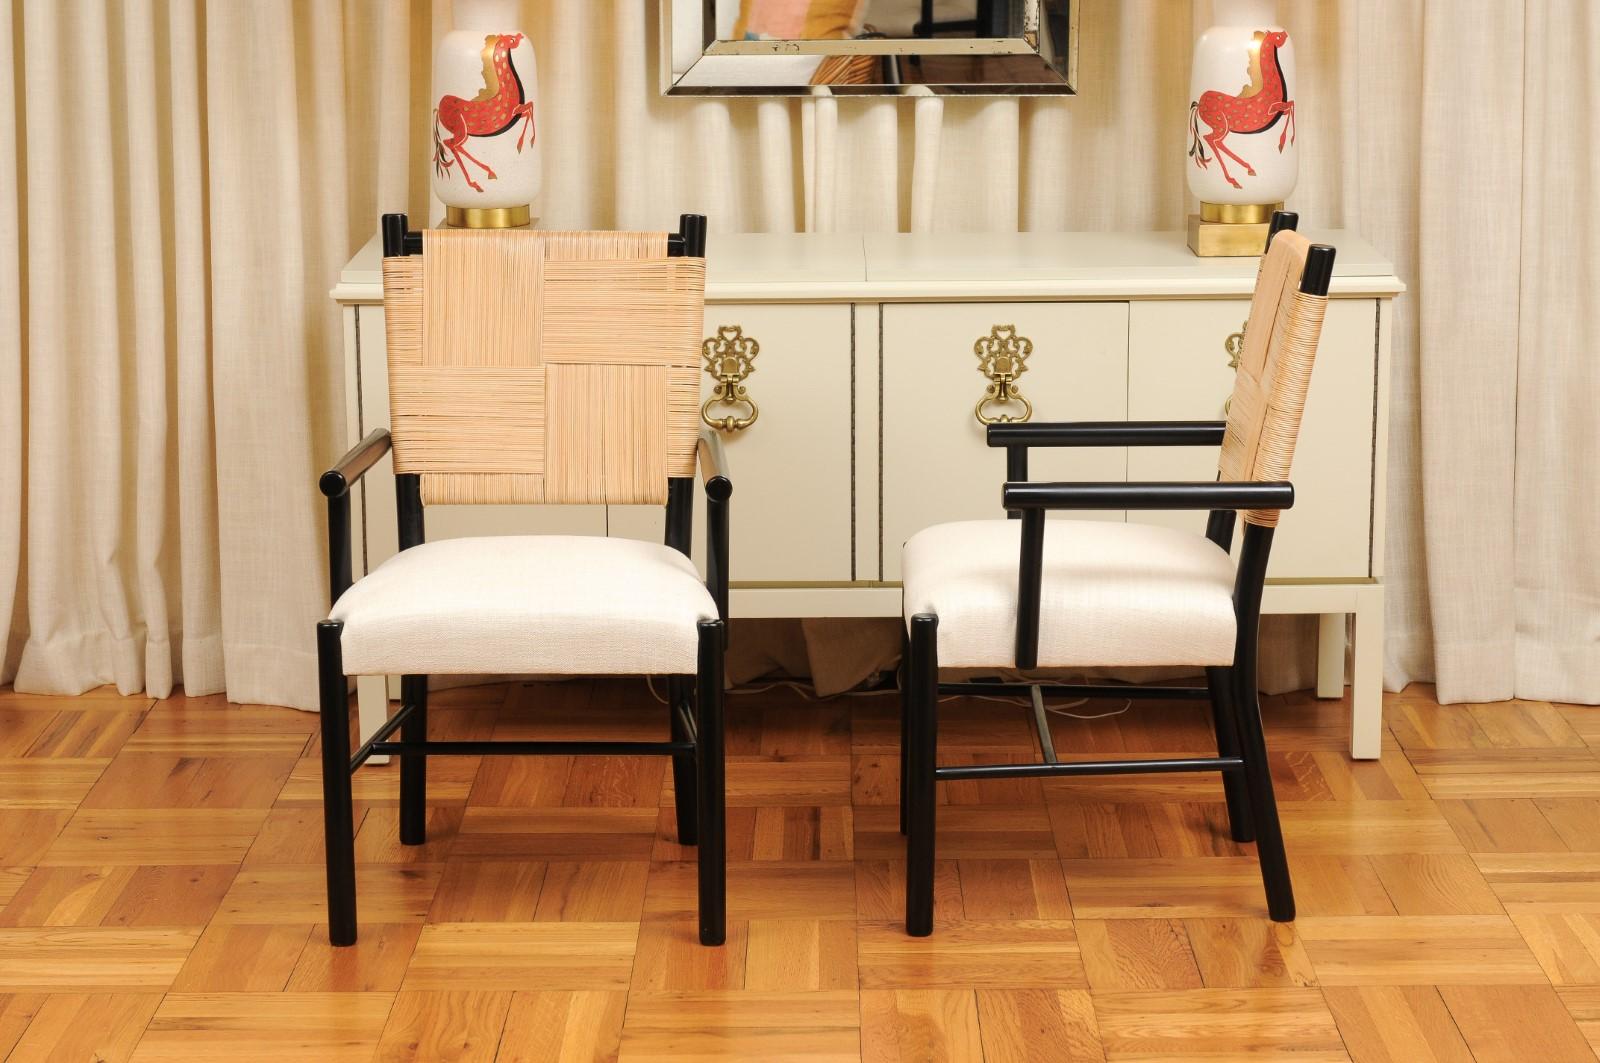 All Arms- Sublime Set of 14 Cane Back Dining Chairs by John Hutton for Donghia For Sale 8